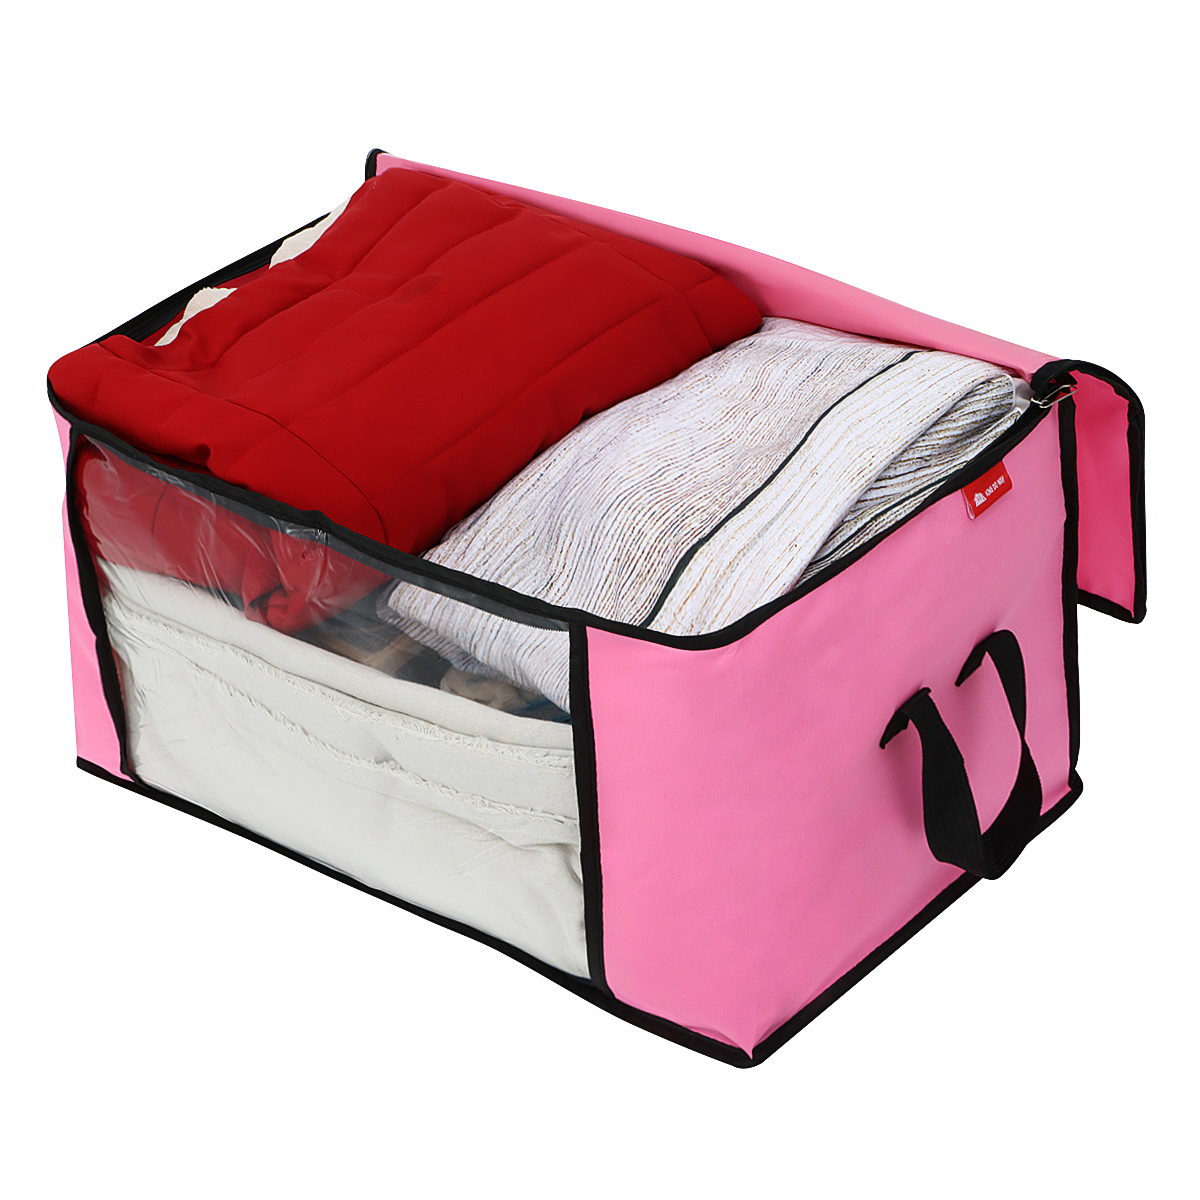 KING-DO-WAY-34-Pcs-90L-Clothing-Storage-Bags-Zipped-Clothes-Organizers-Quilts-Blankets-Bedding-Handb-1855896-6